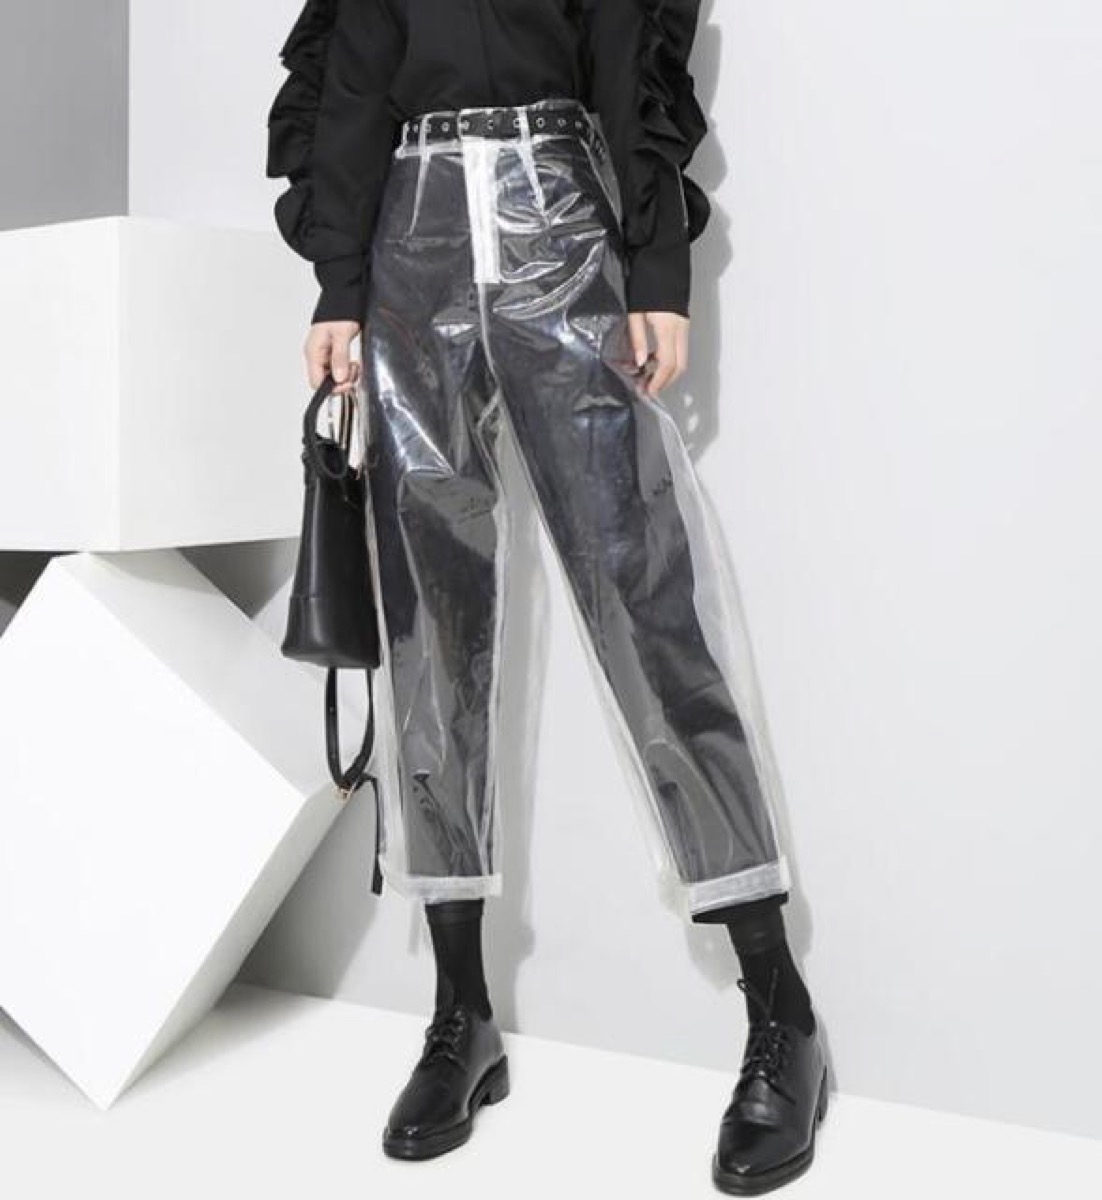 Clear pants worst modern style trends